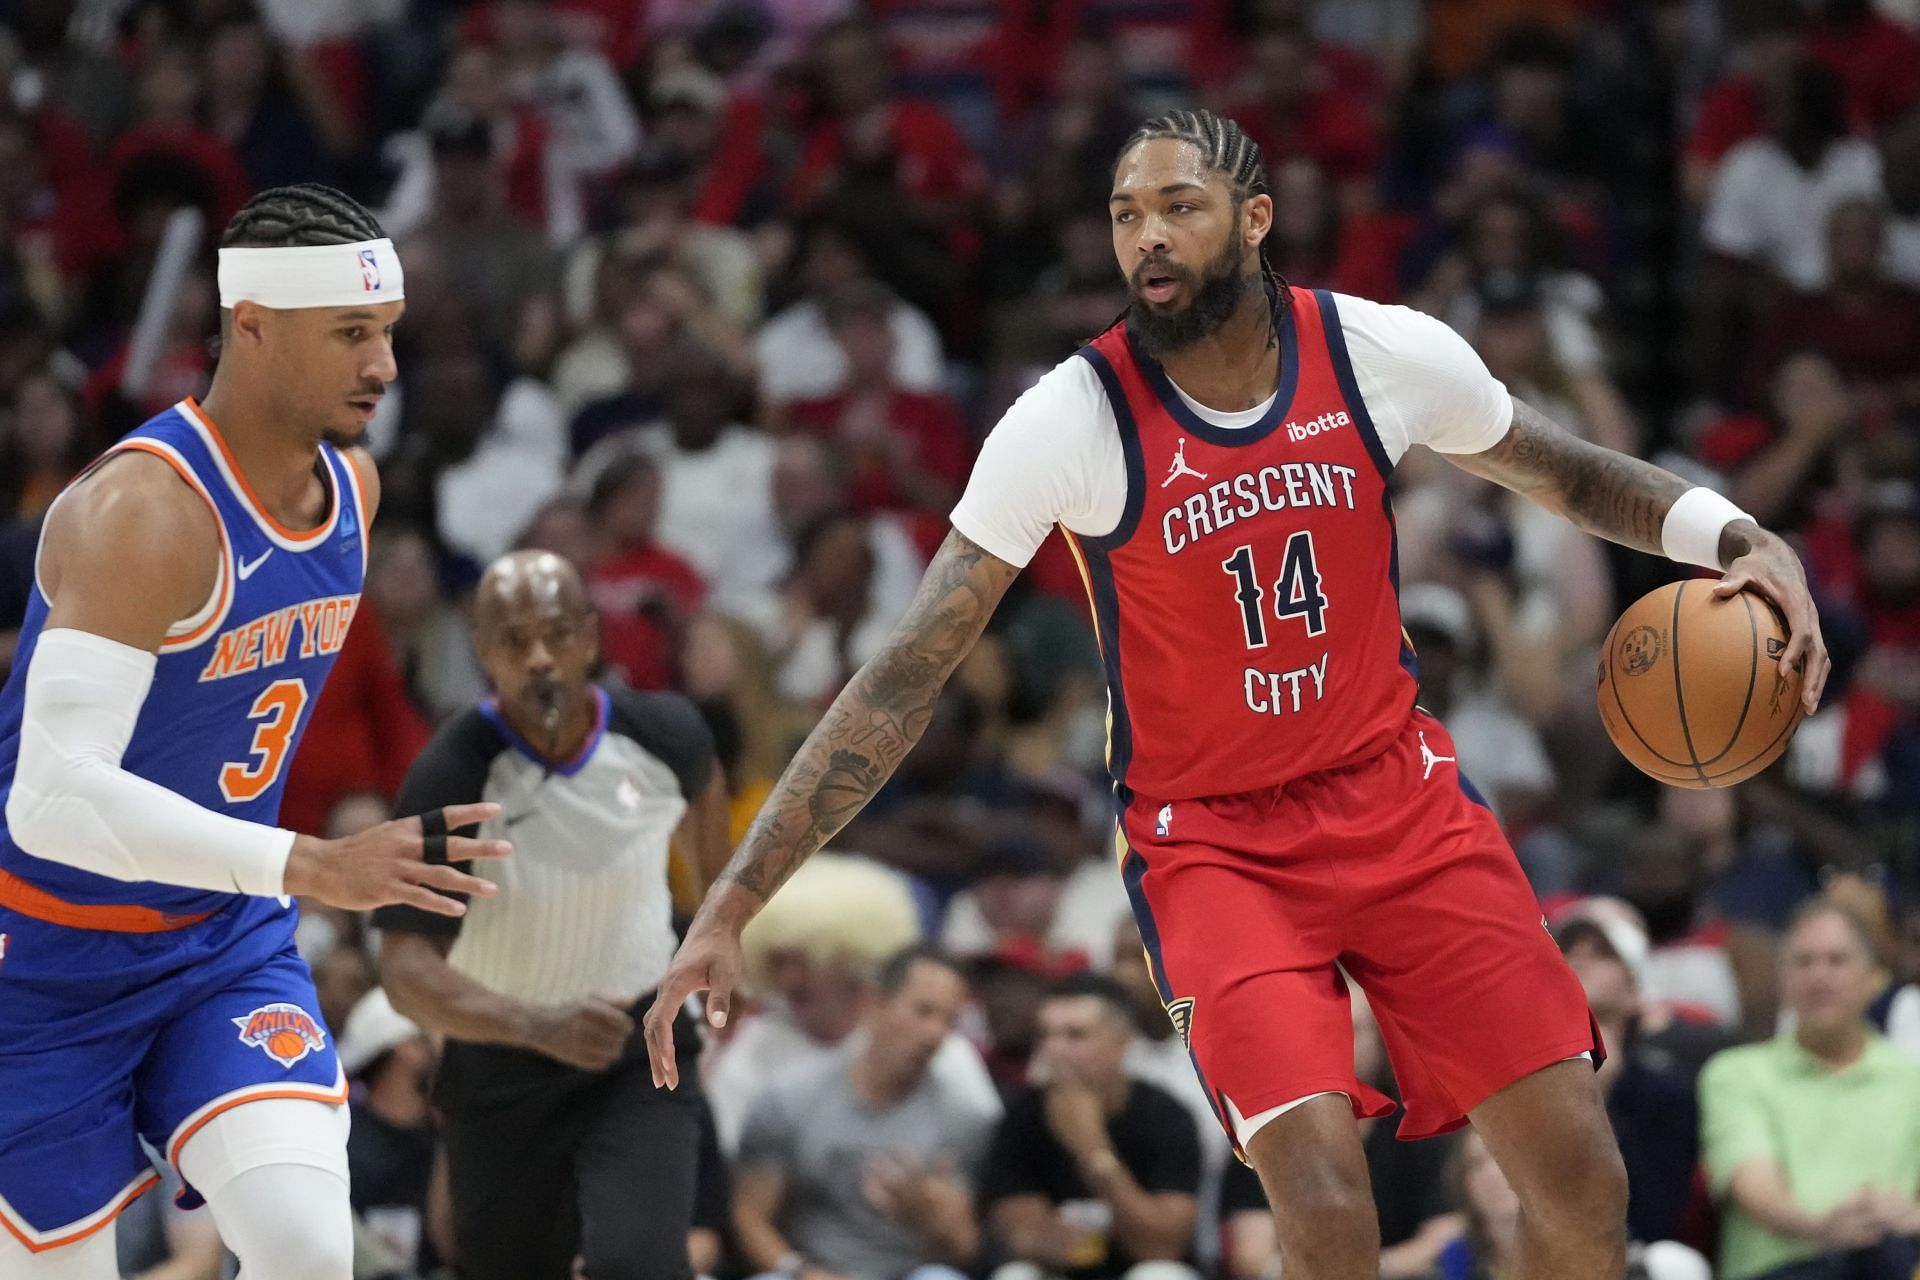 How to Watch the Detroit Pistons vs. New Orleans Pelicans - NBA